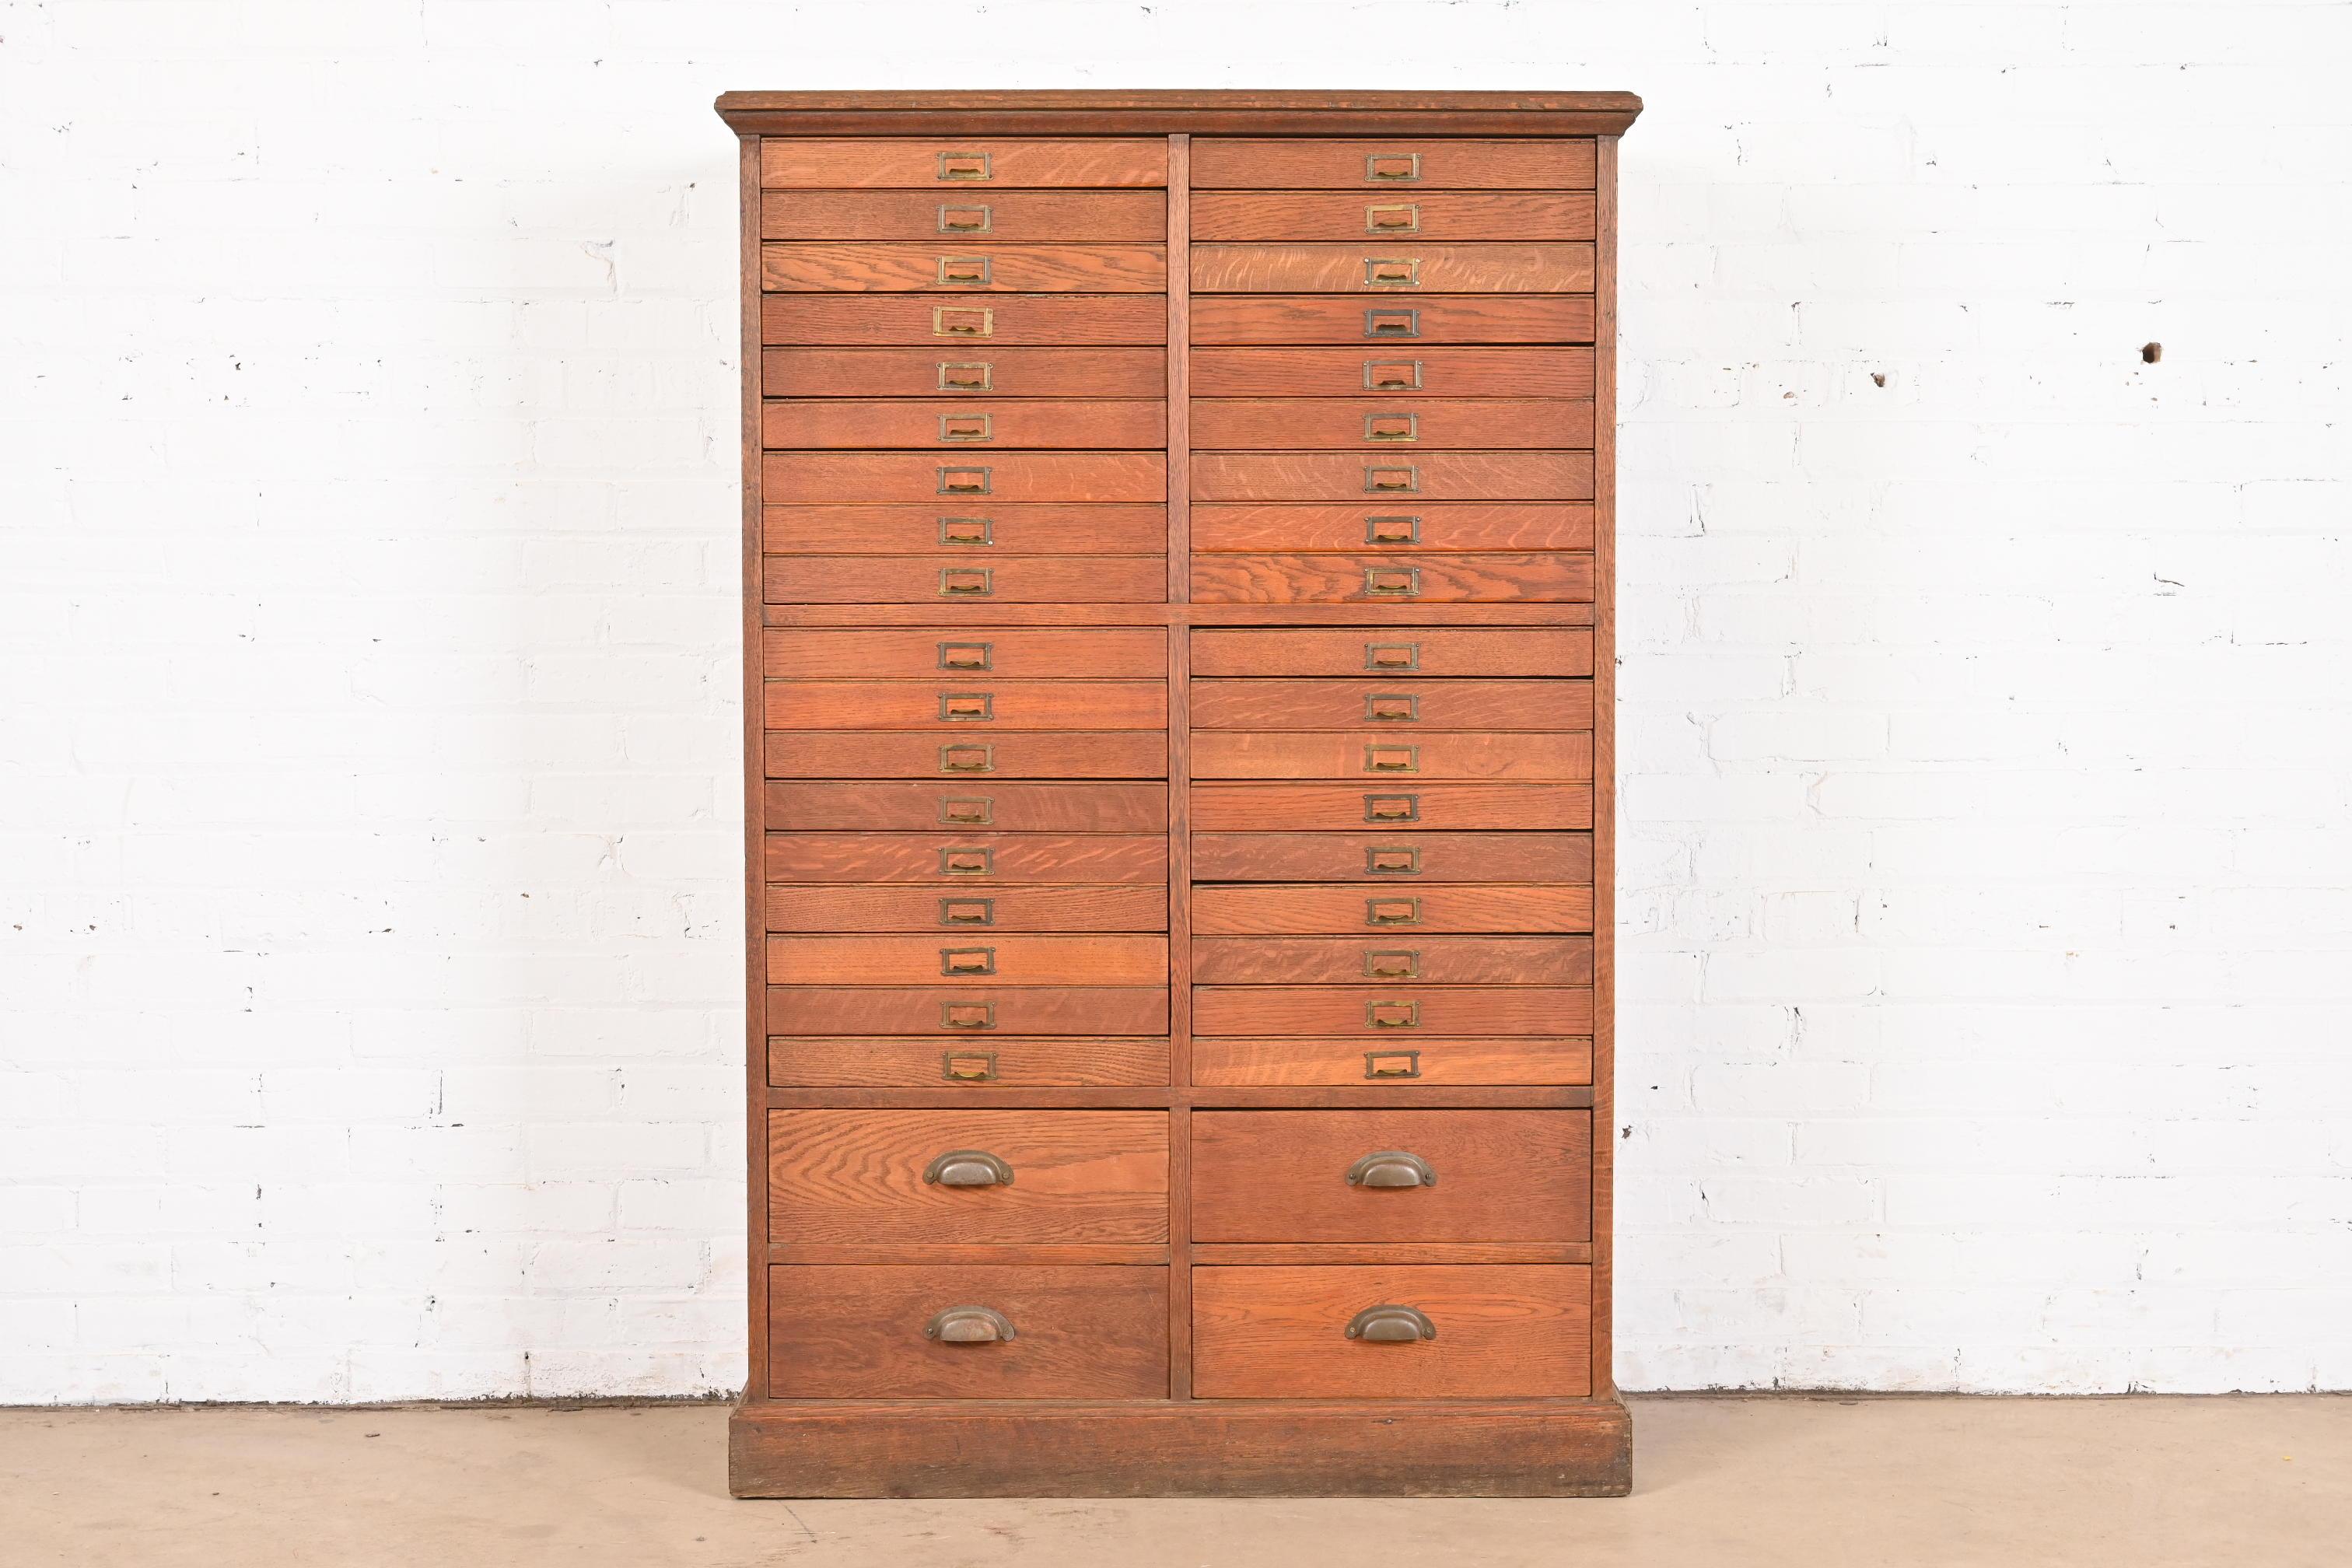 An outstanding antique Arts & Crafts 40-drawer file cabinet or chest of drawers

USA, Circa 1900

Solid quarter-sawn oak, with brass hardware.

Measures: 38